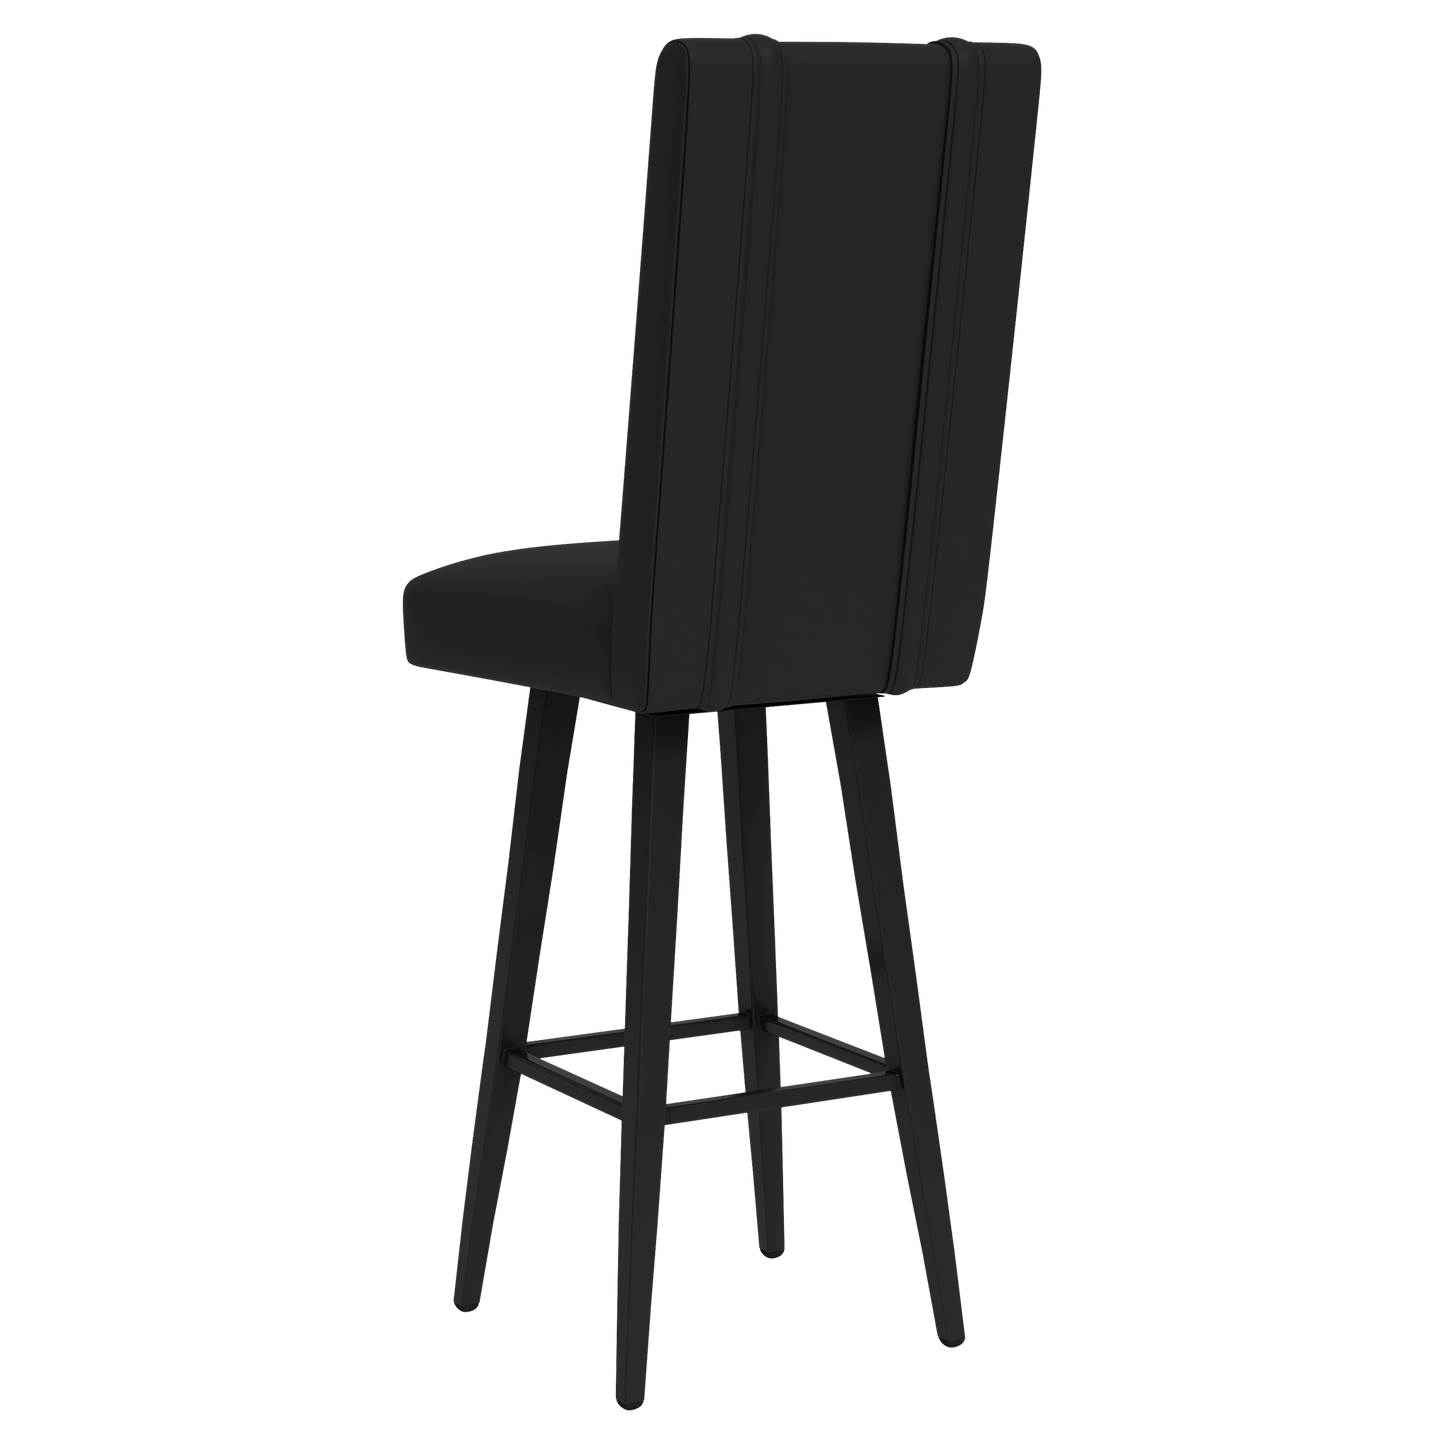 Swivel Bar Stool 2000 with 2016 Chicago Cubs World Series Logo